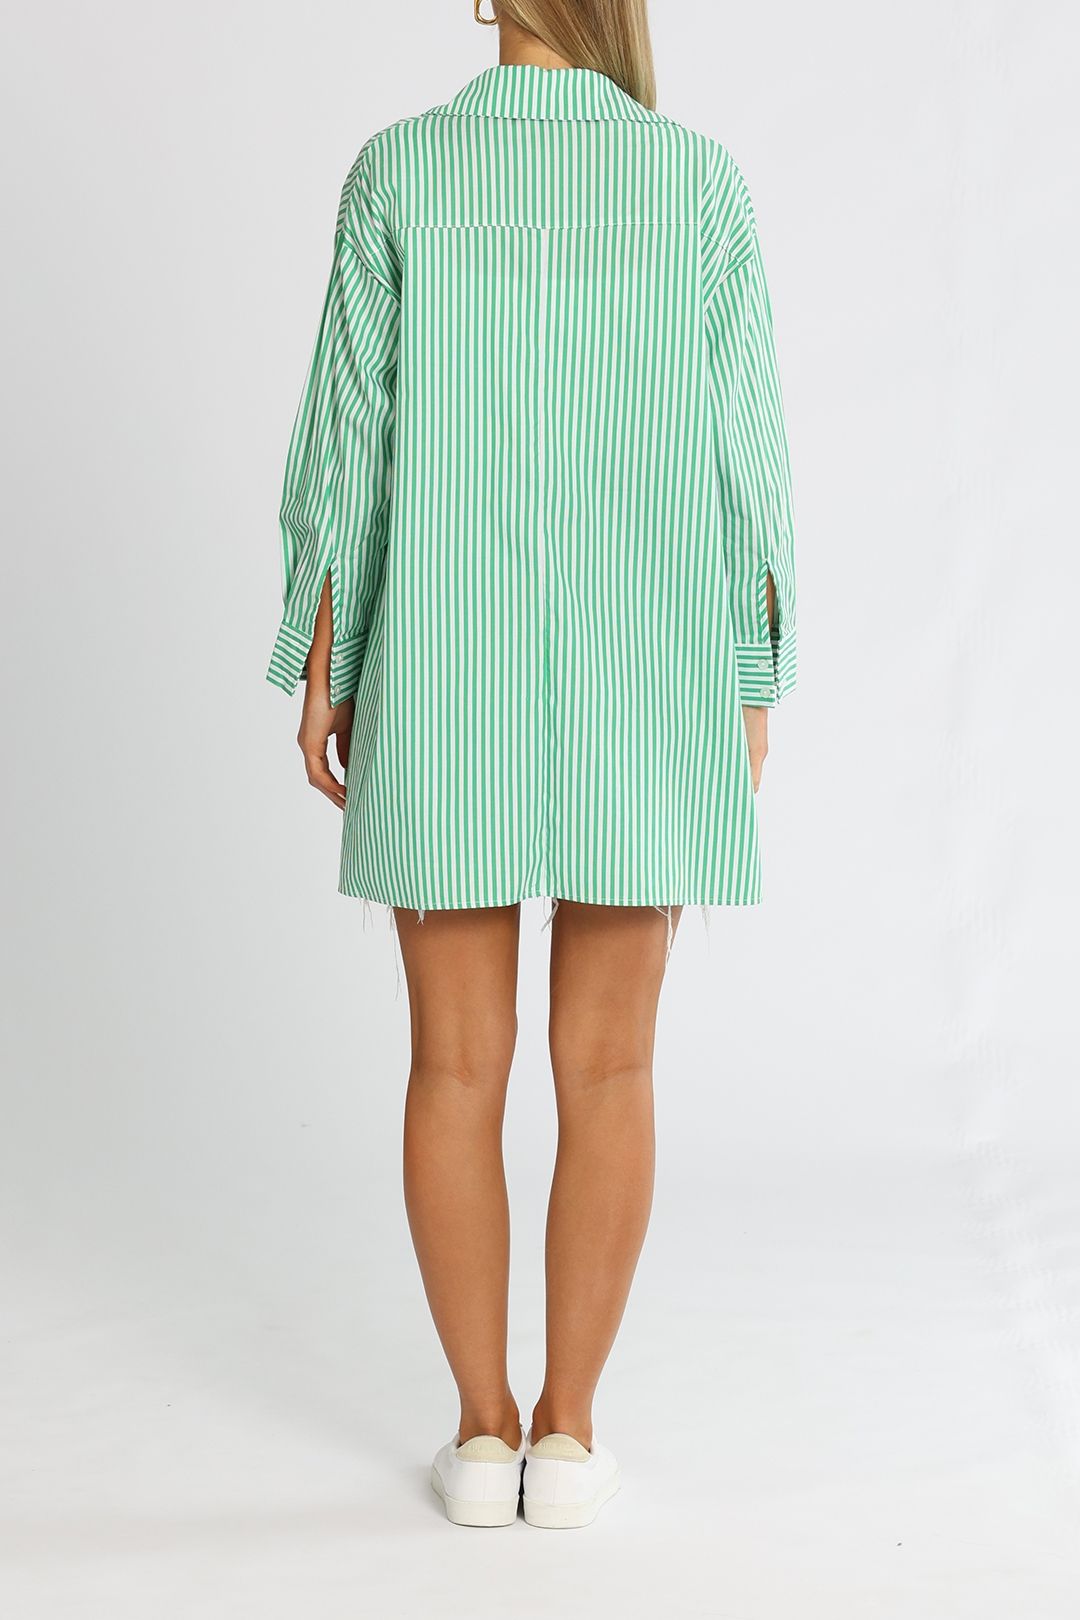 Bohemian Traders Green Stripe Shirt Relaxed Fit